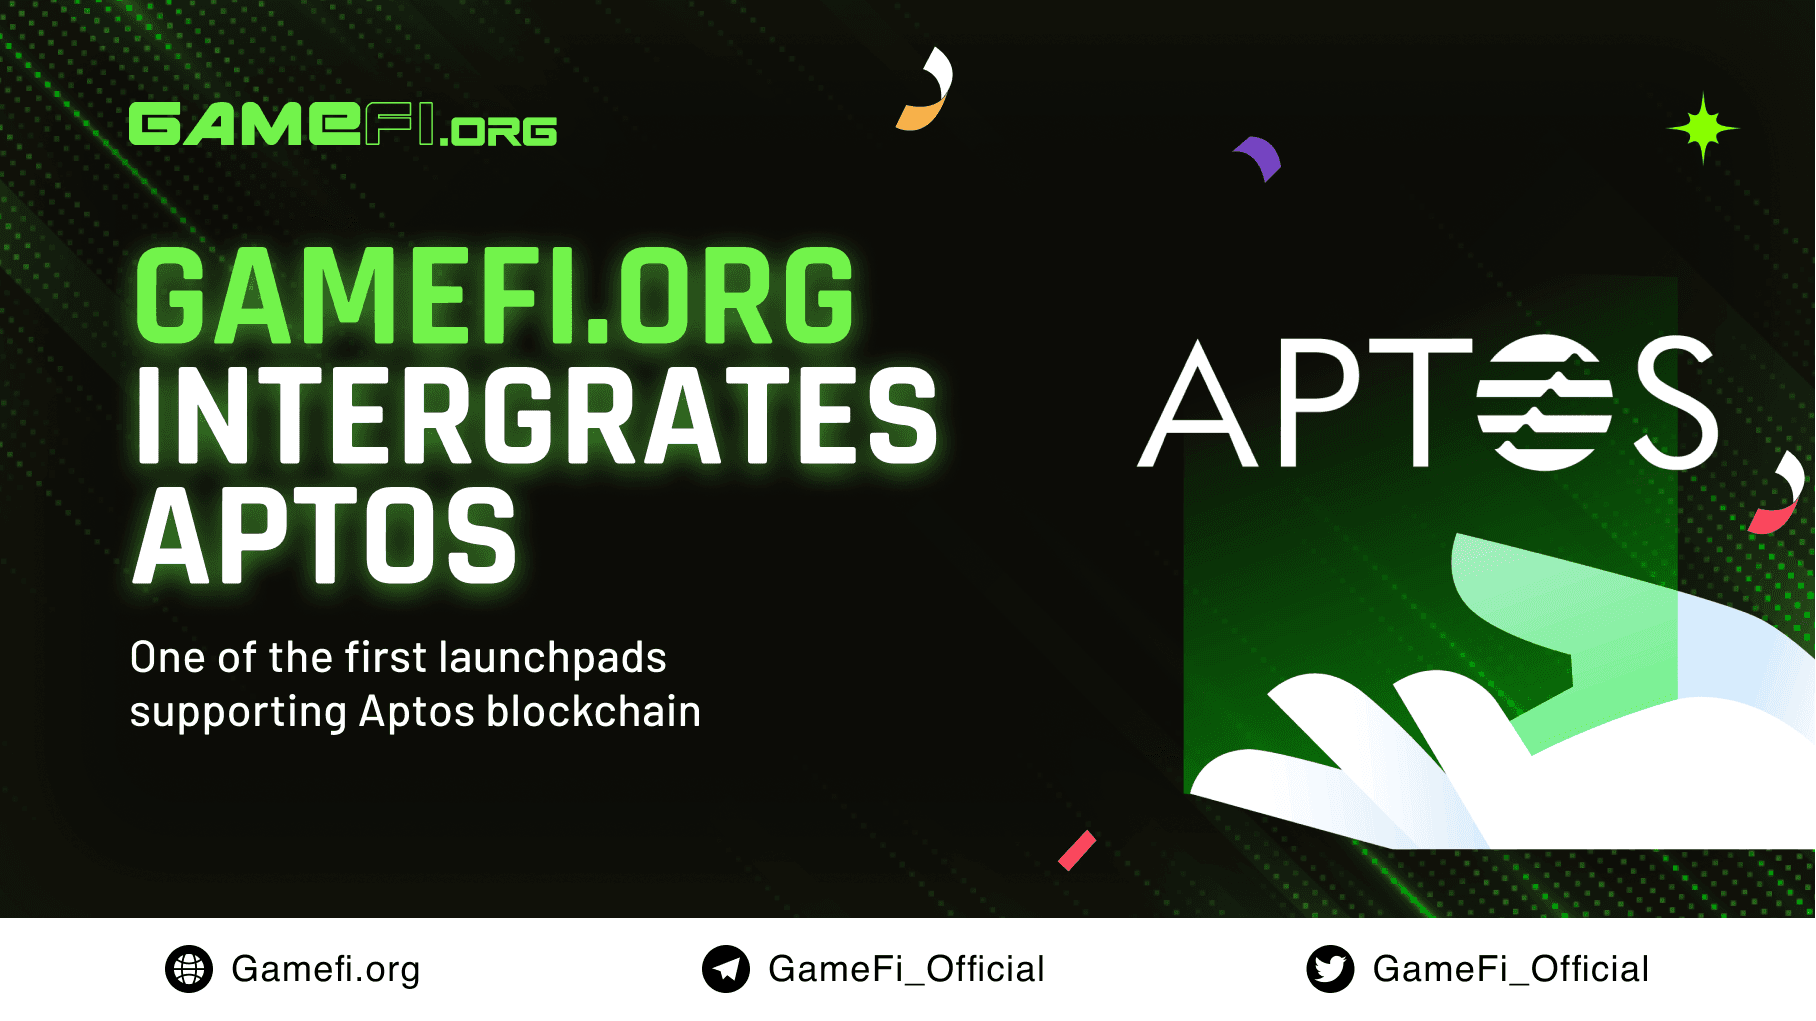 GameFi.org - One of the First Launchpads Integrating Aptos and Supporting Projects on Its Network